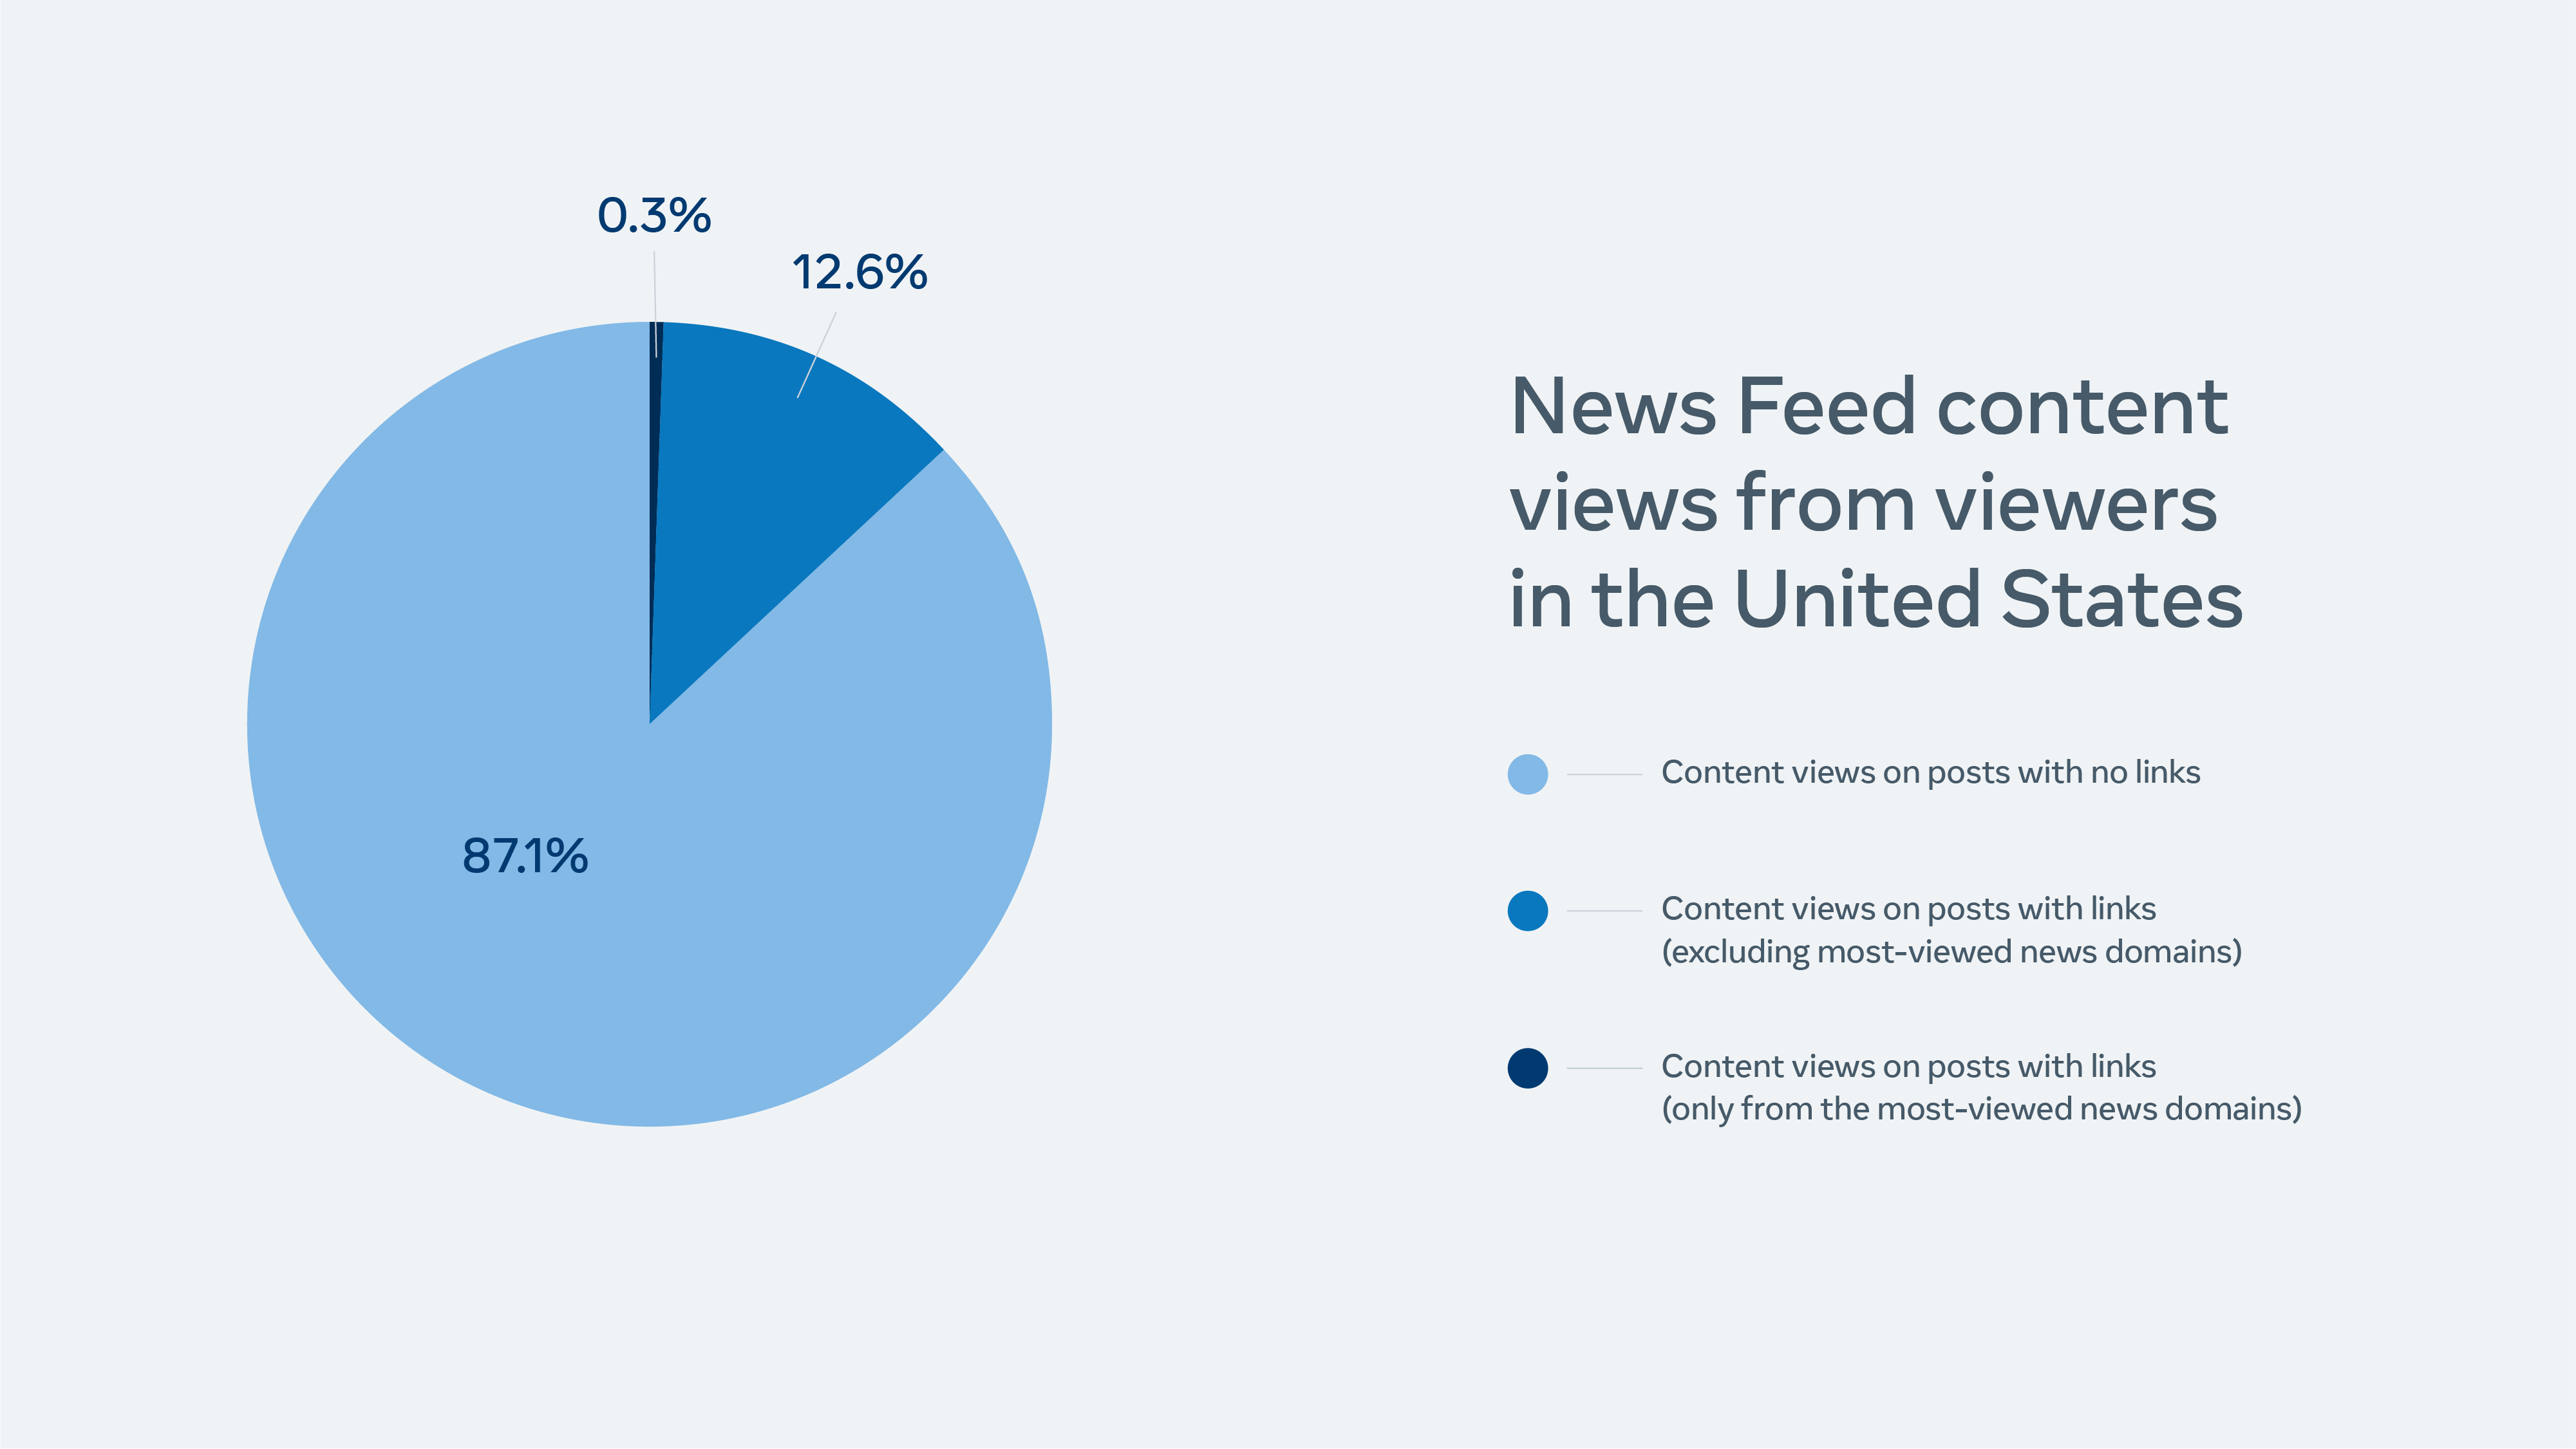 News Feed Content views from content viewers in the US during Q2 2021, broken down by inclusion of links and the most-viewed news domains.